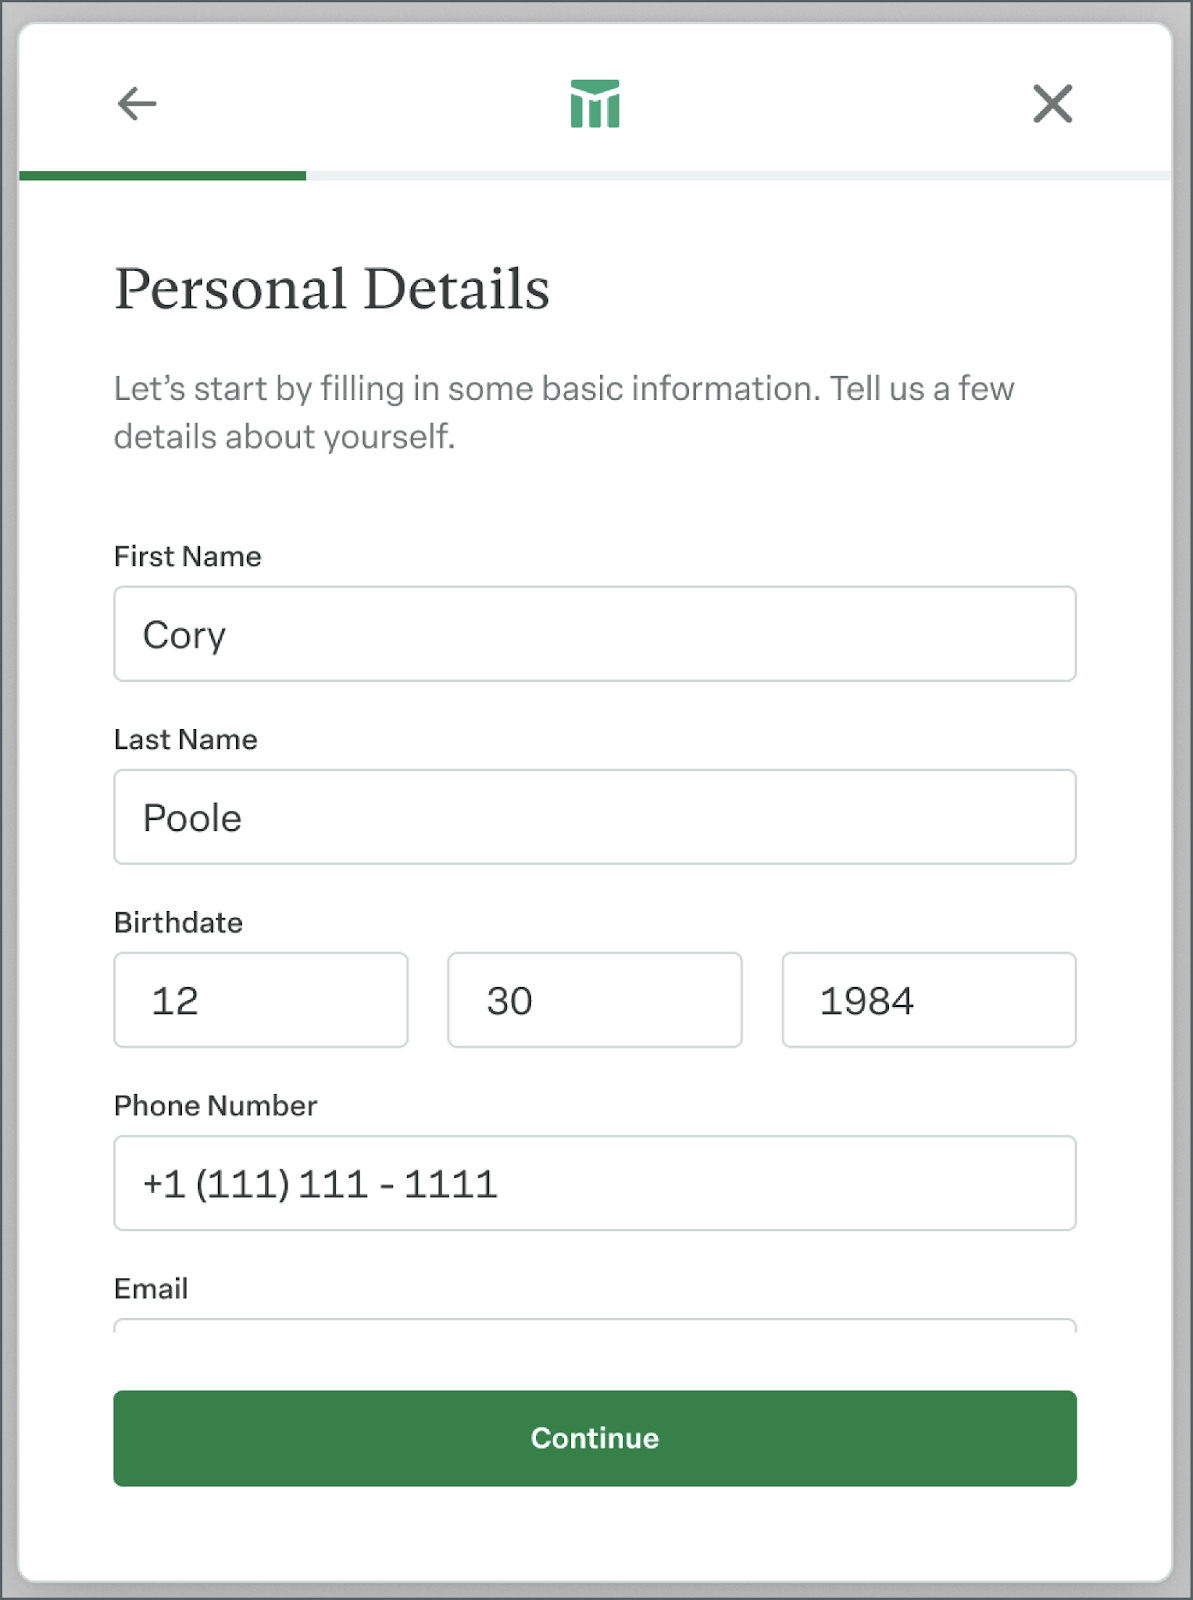 Image of Compliance onboarding form